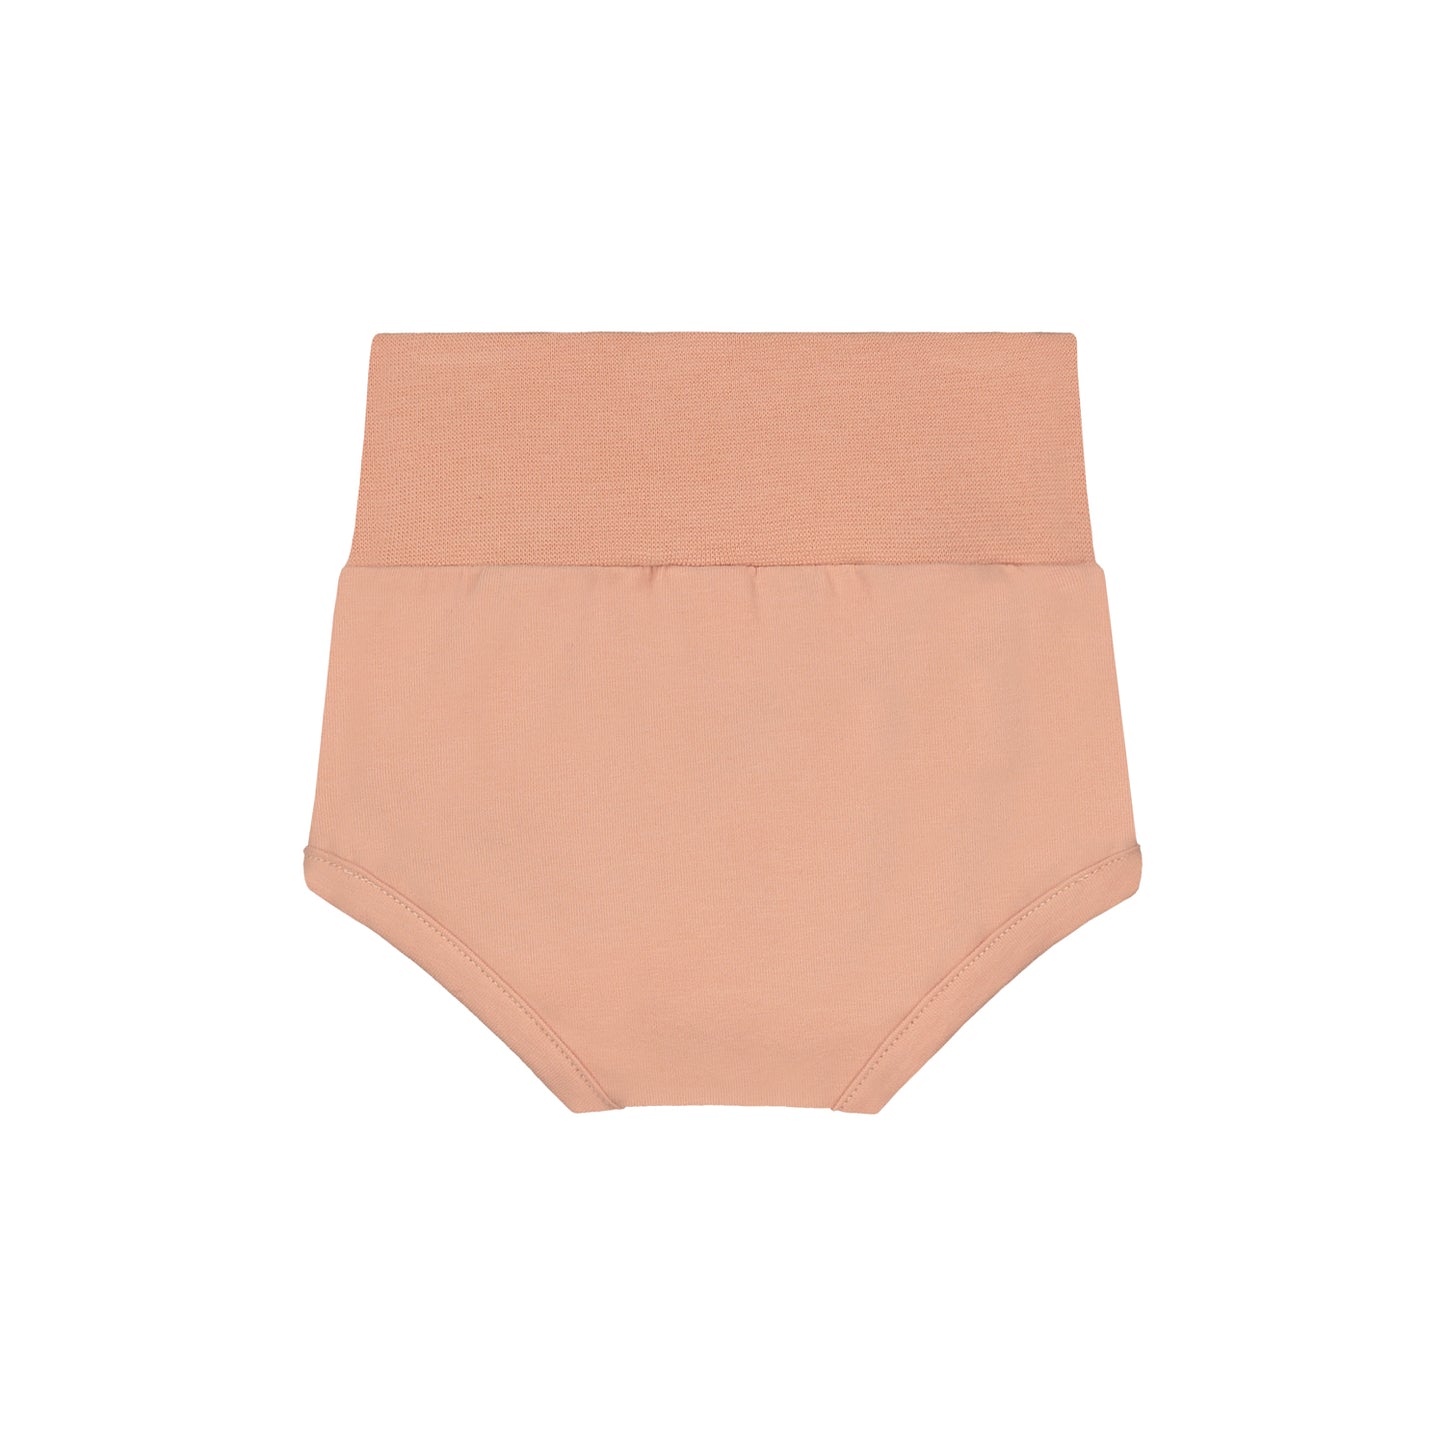 Baby Shorts - Rustic Clay | Gray Label